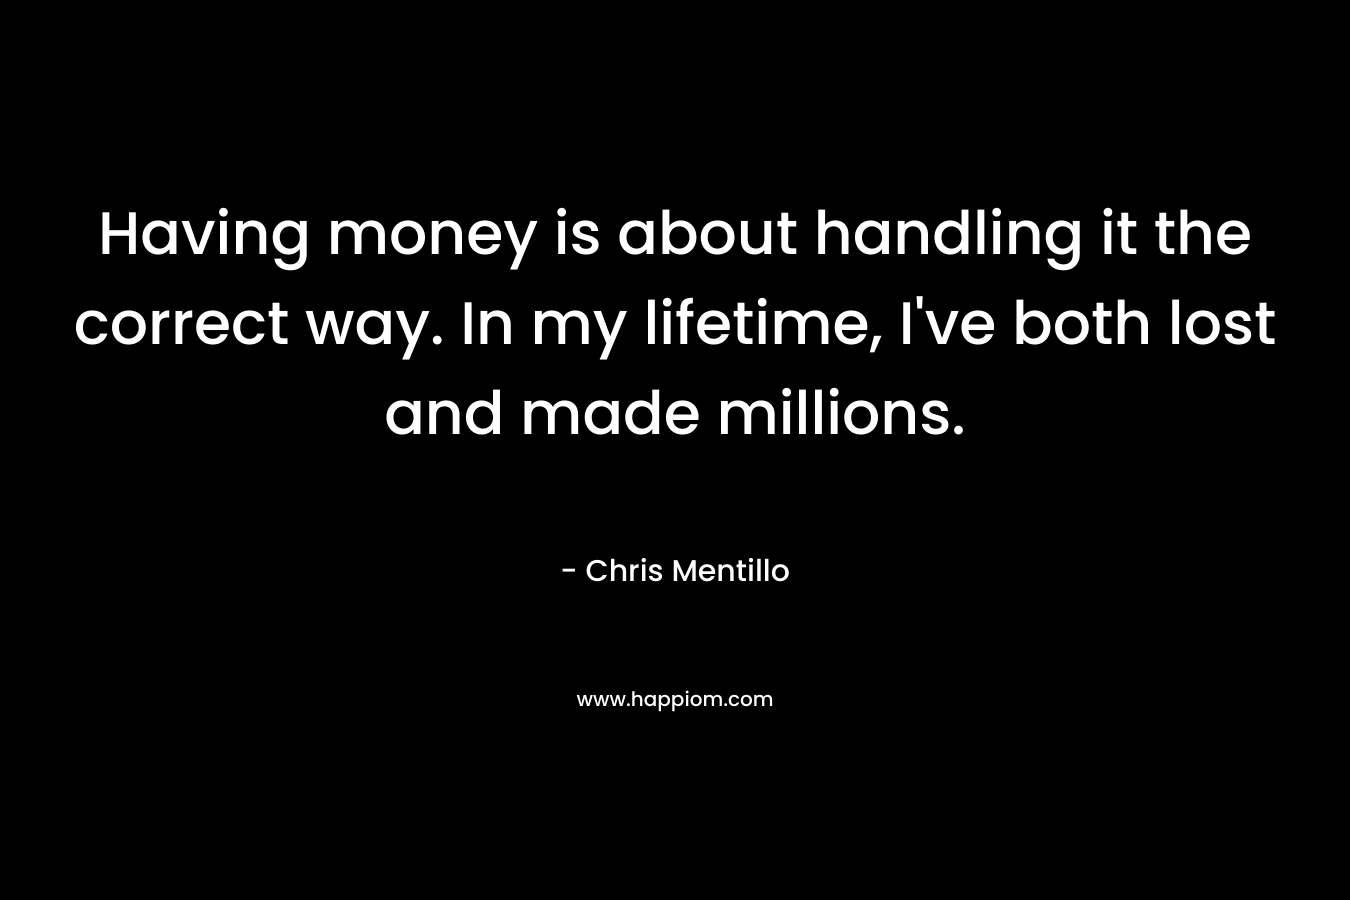 Having money is about handling it the correct way. In my lifetime, I’ve both lost and made millions. – Chris Mentillo